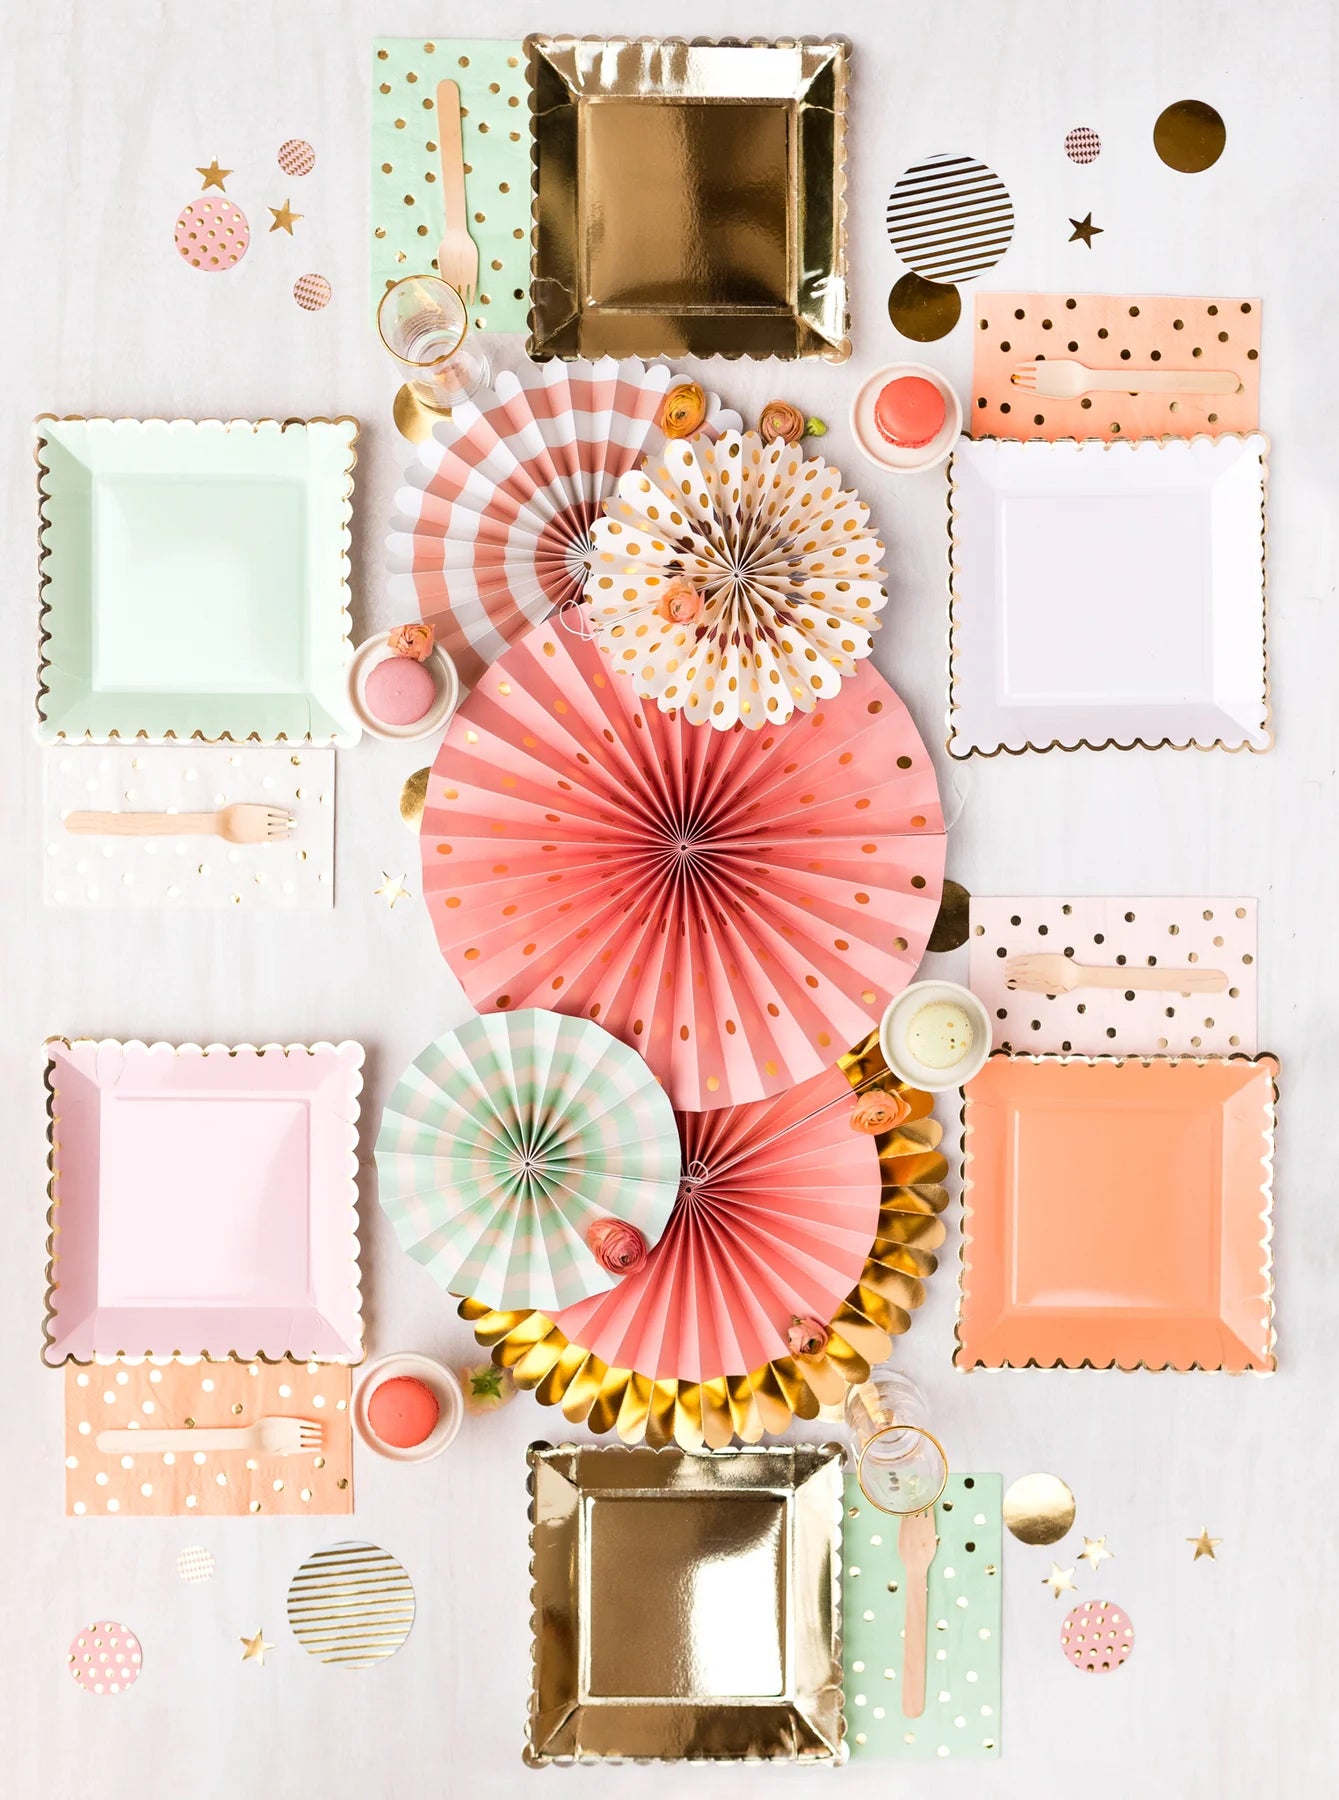 Blush and Gold Dot Guest Towel Napkins